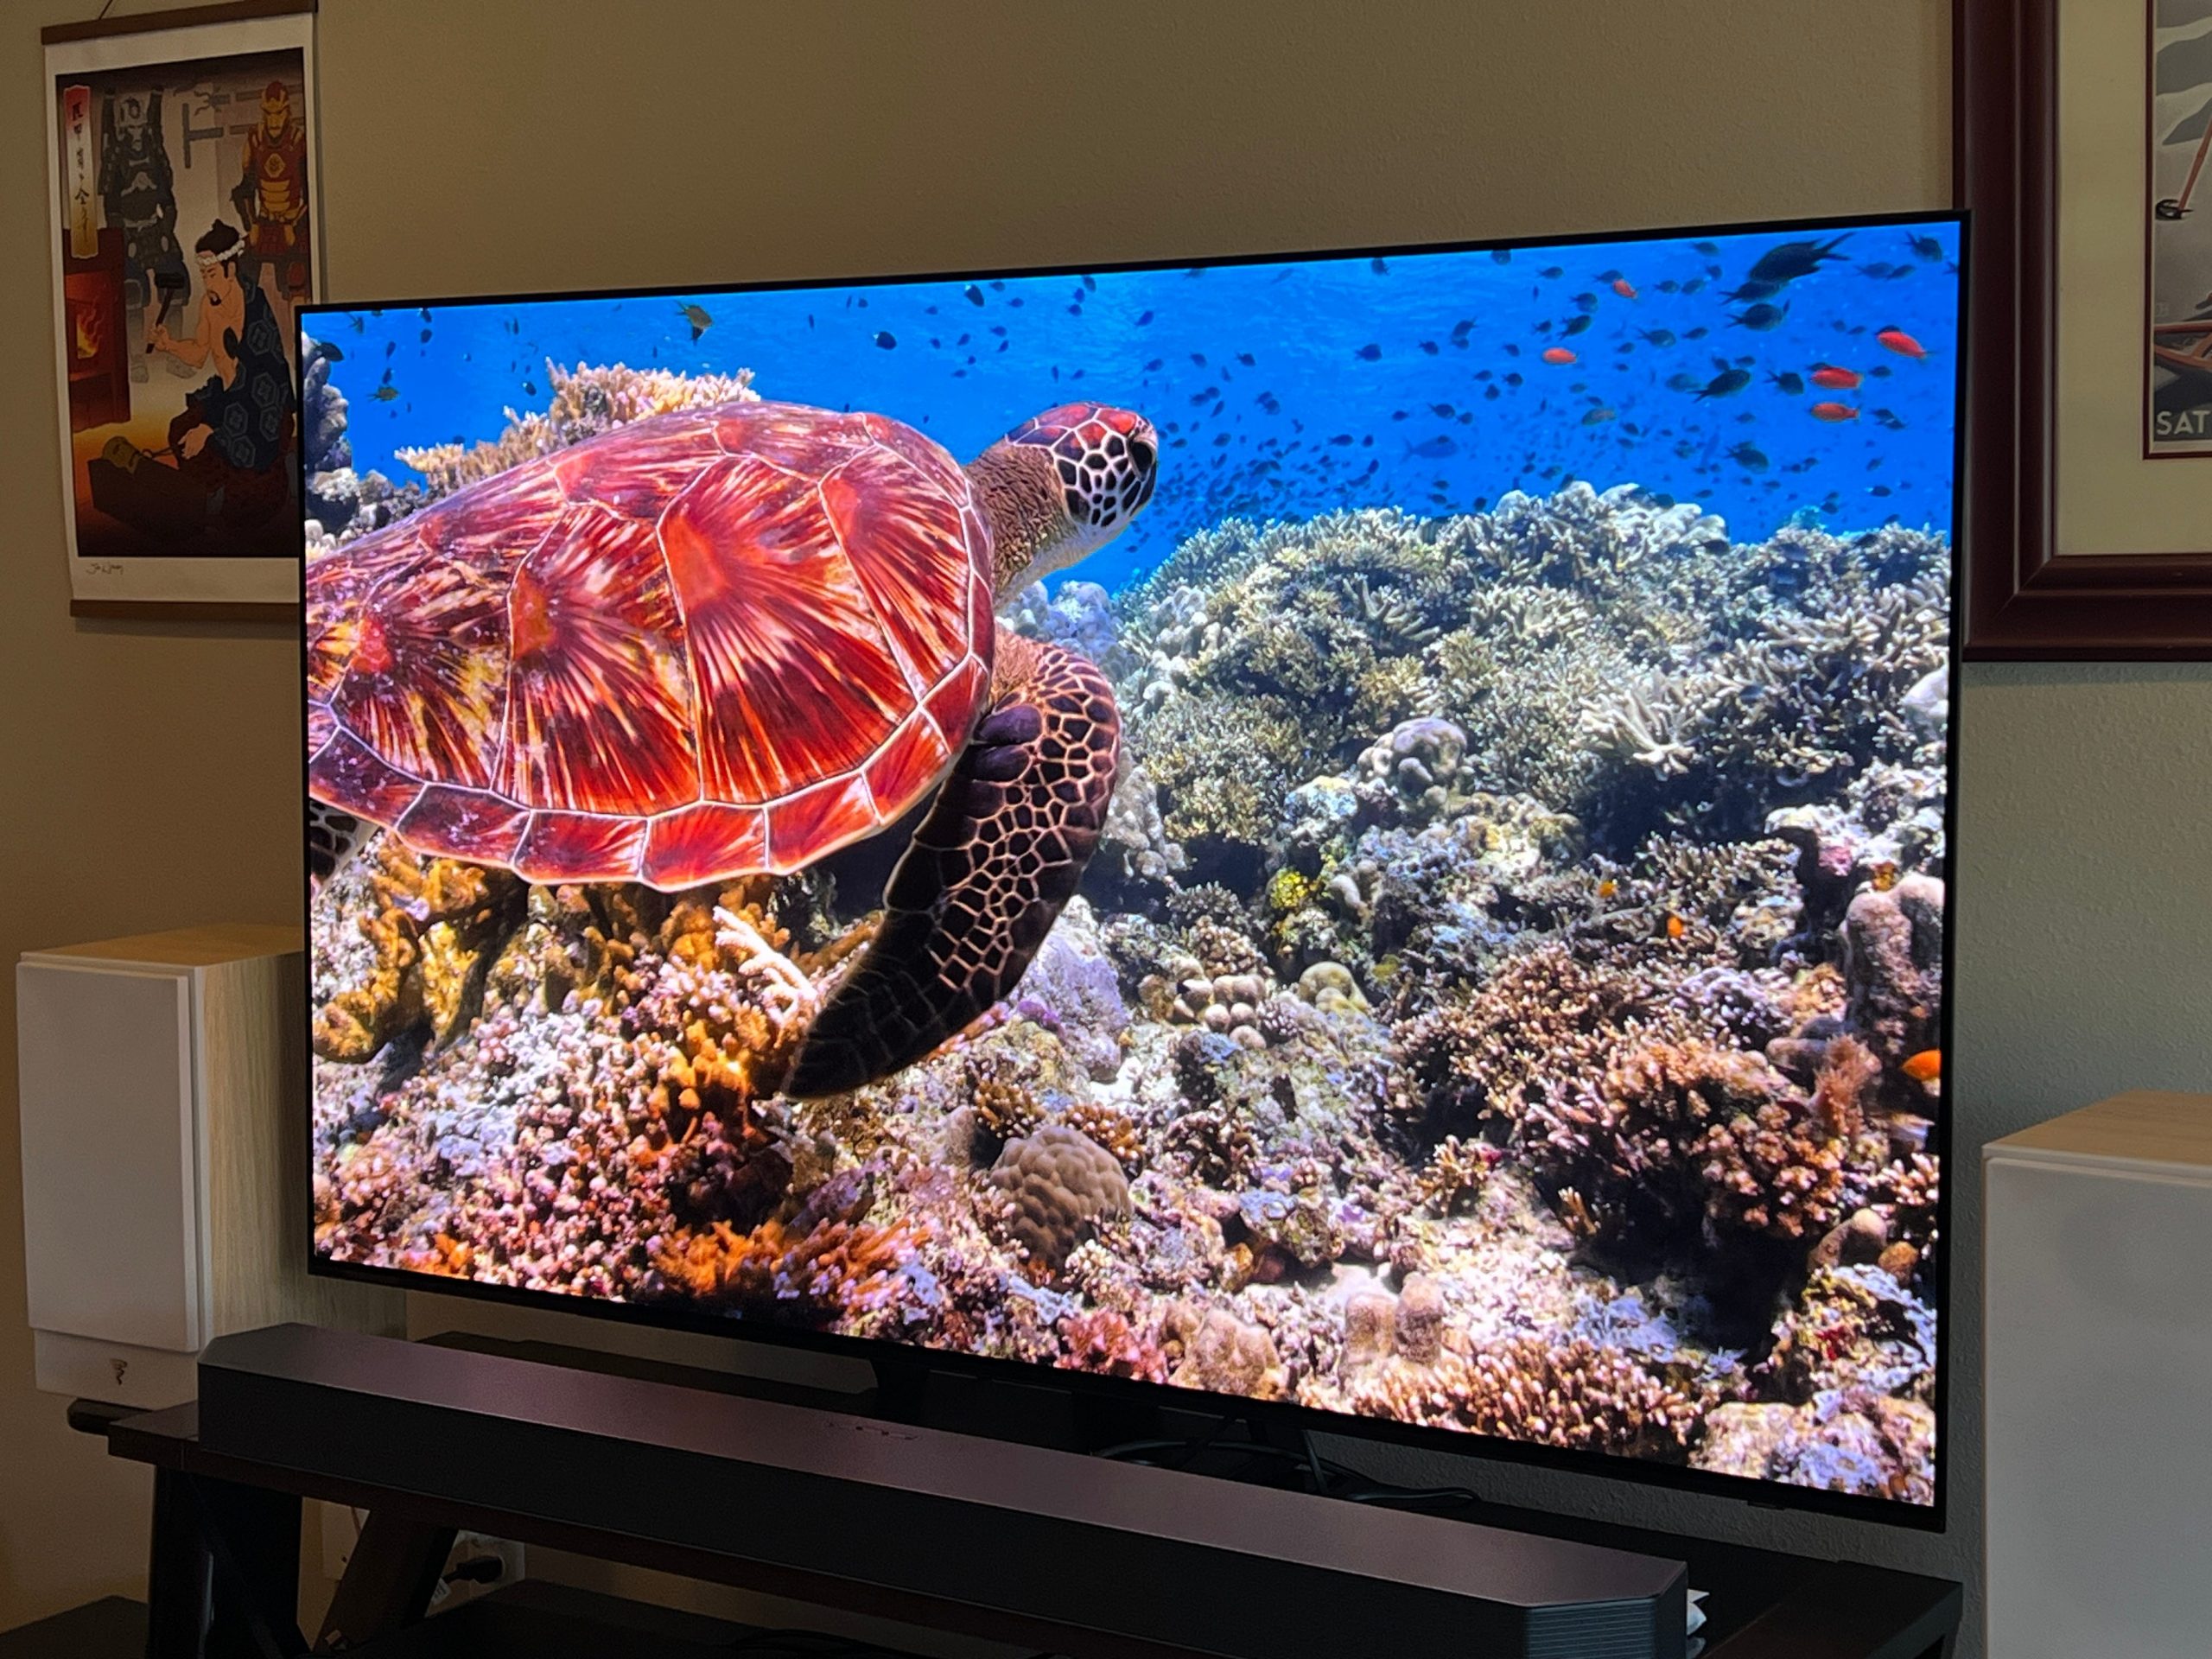 The Samsung S90C television with an undersea shot on the screen, captured from the side.